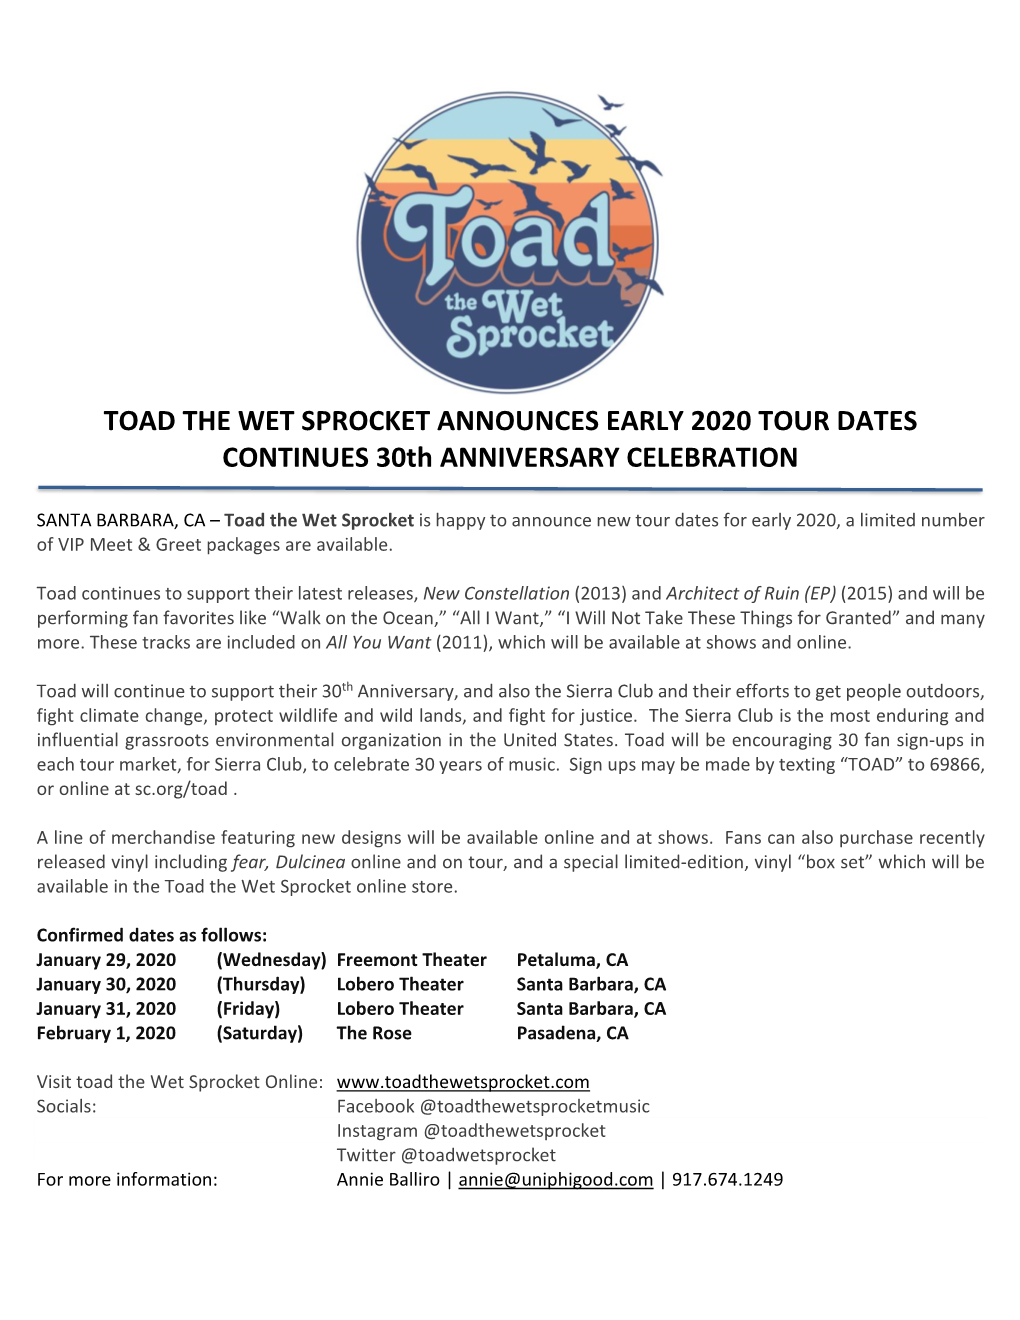 TOAD the WET SPROCKET ANNOUNCES EARLY 2020 TOUR DATES CONTINUES 30Th ANNIVERSARY CELEBRATION